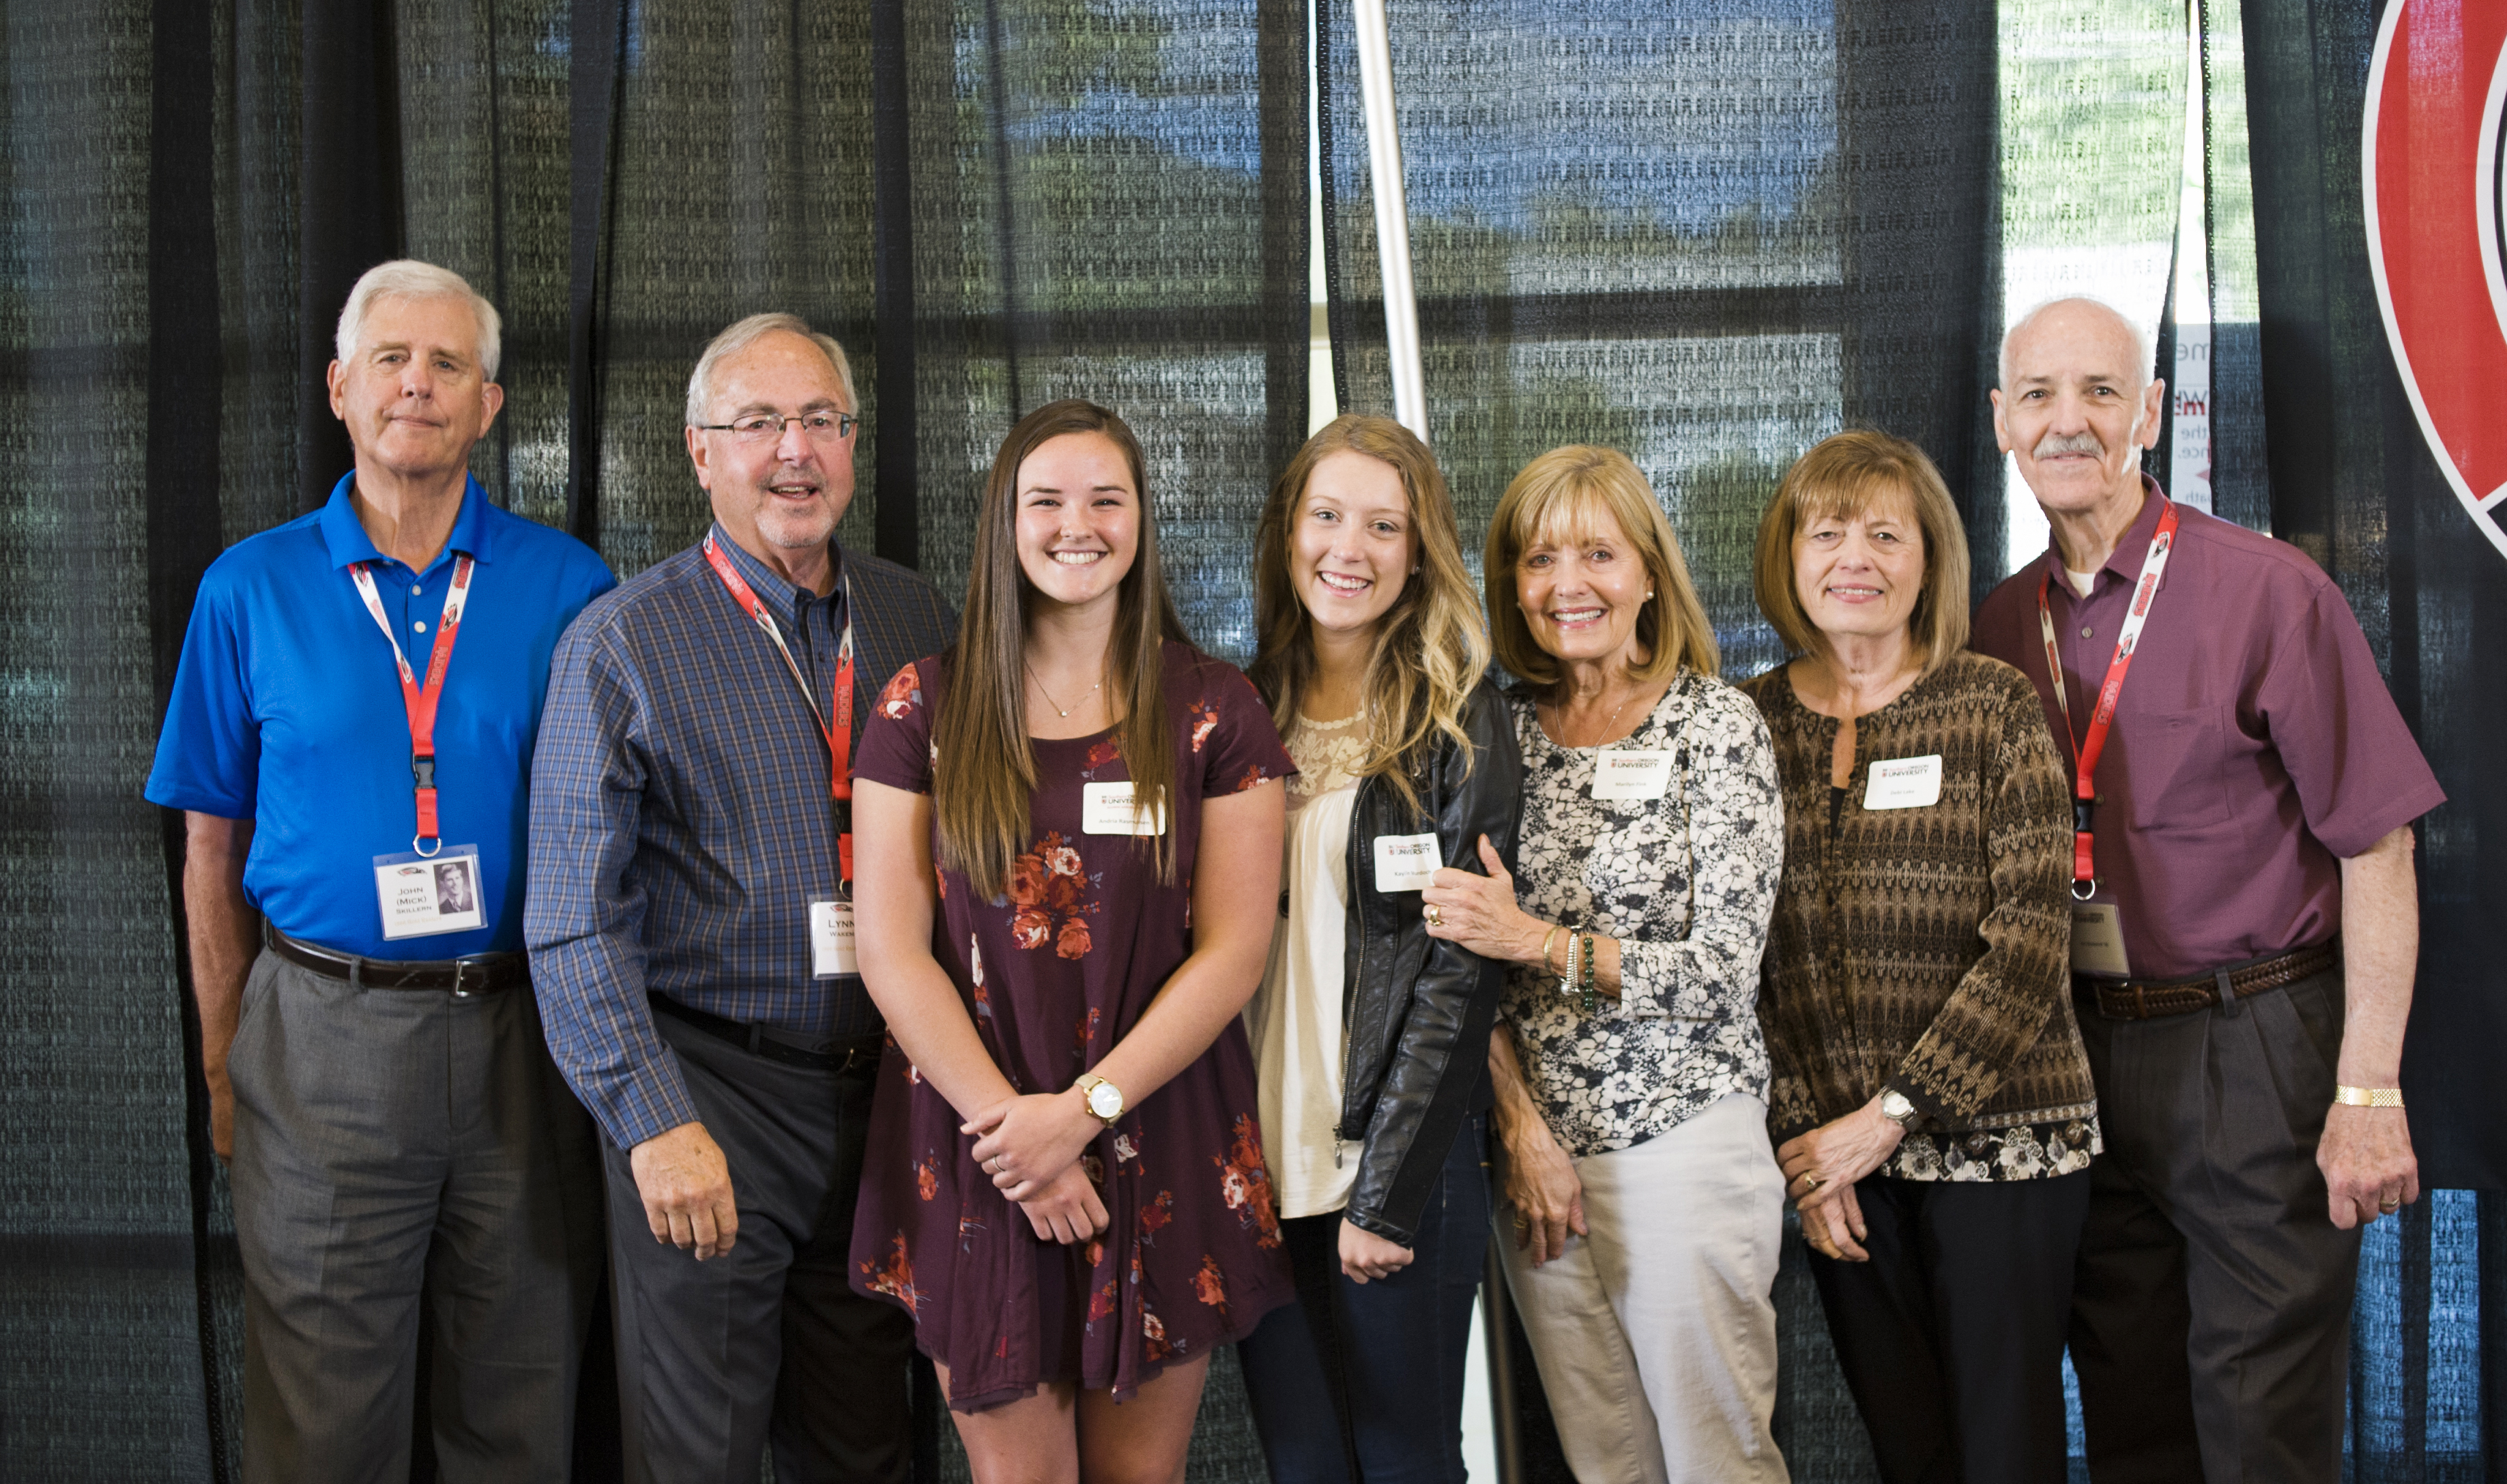 Donors with scholarship recipient